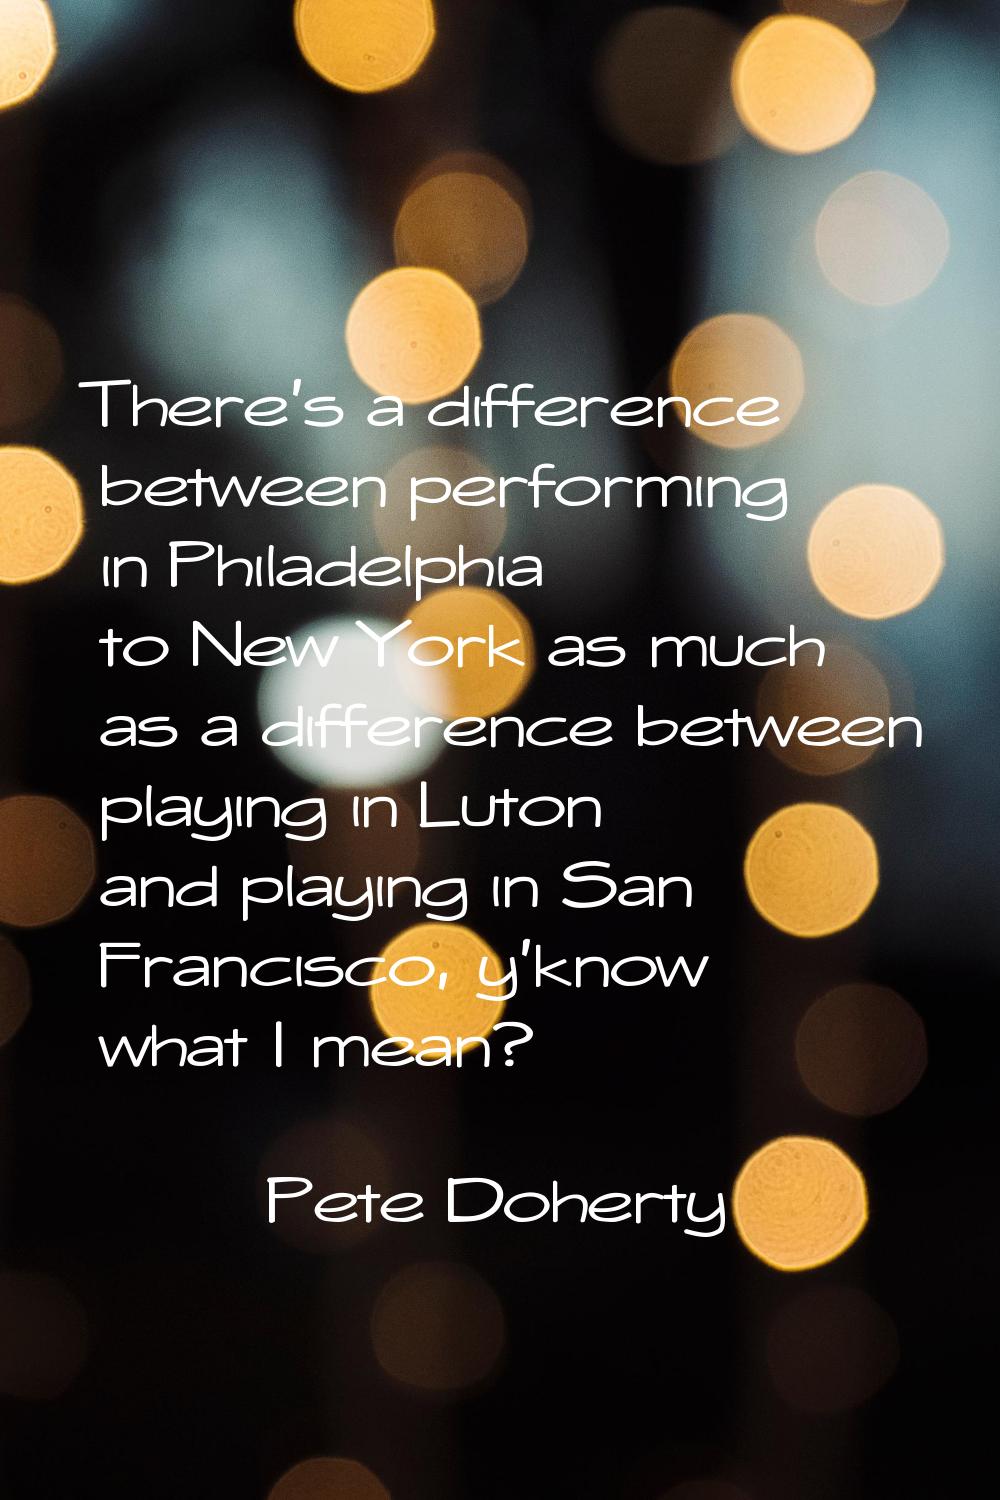 There's a difference between performing in Philadelphia to New York as much as a difference between